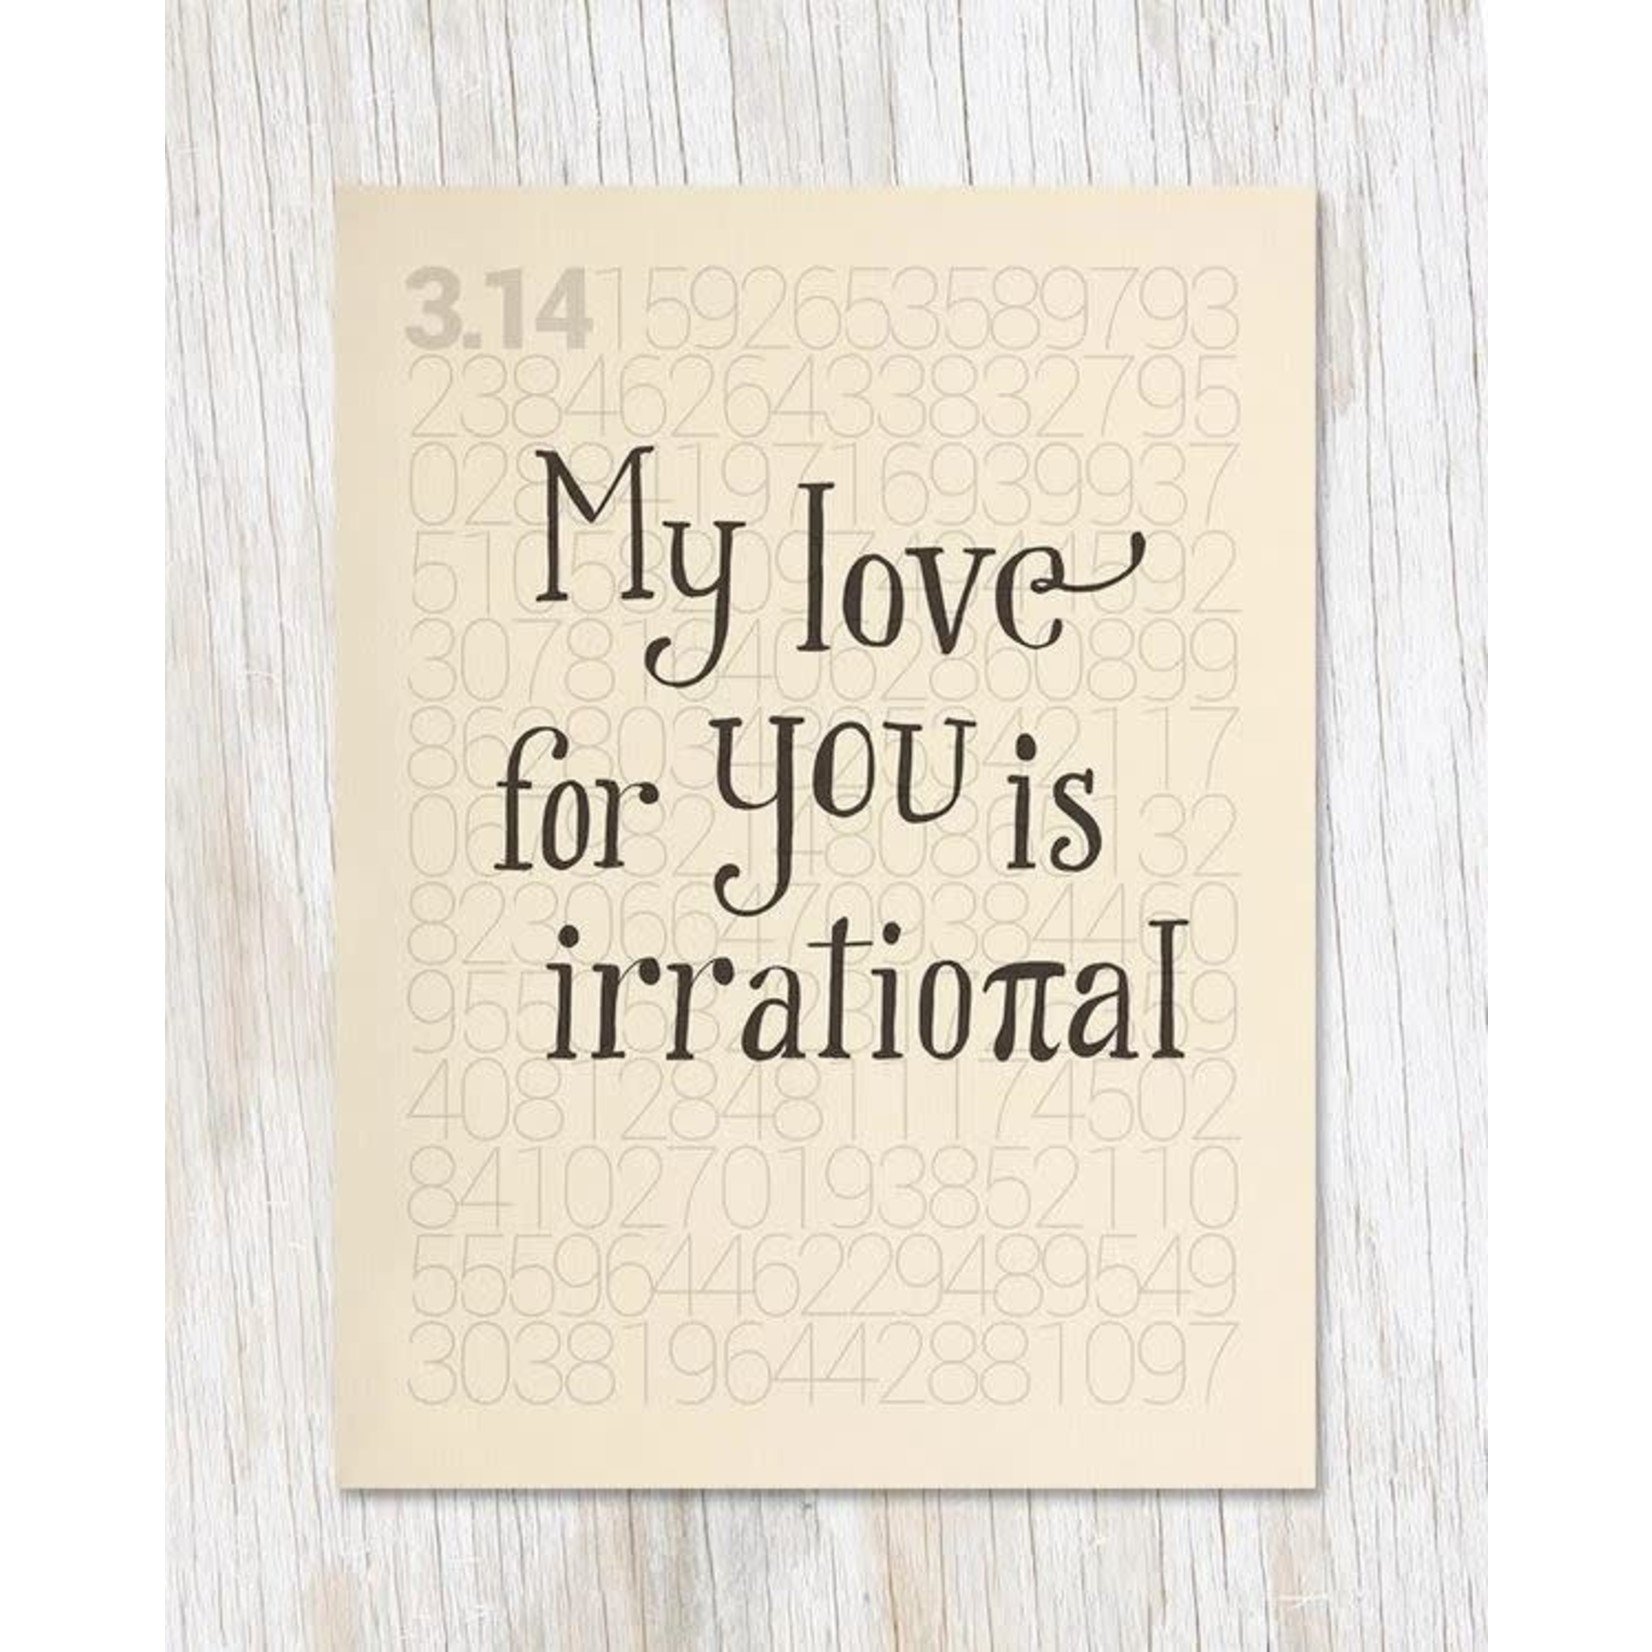 Science and Technology Card - Pi: Irrational Love